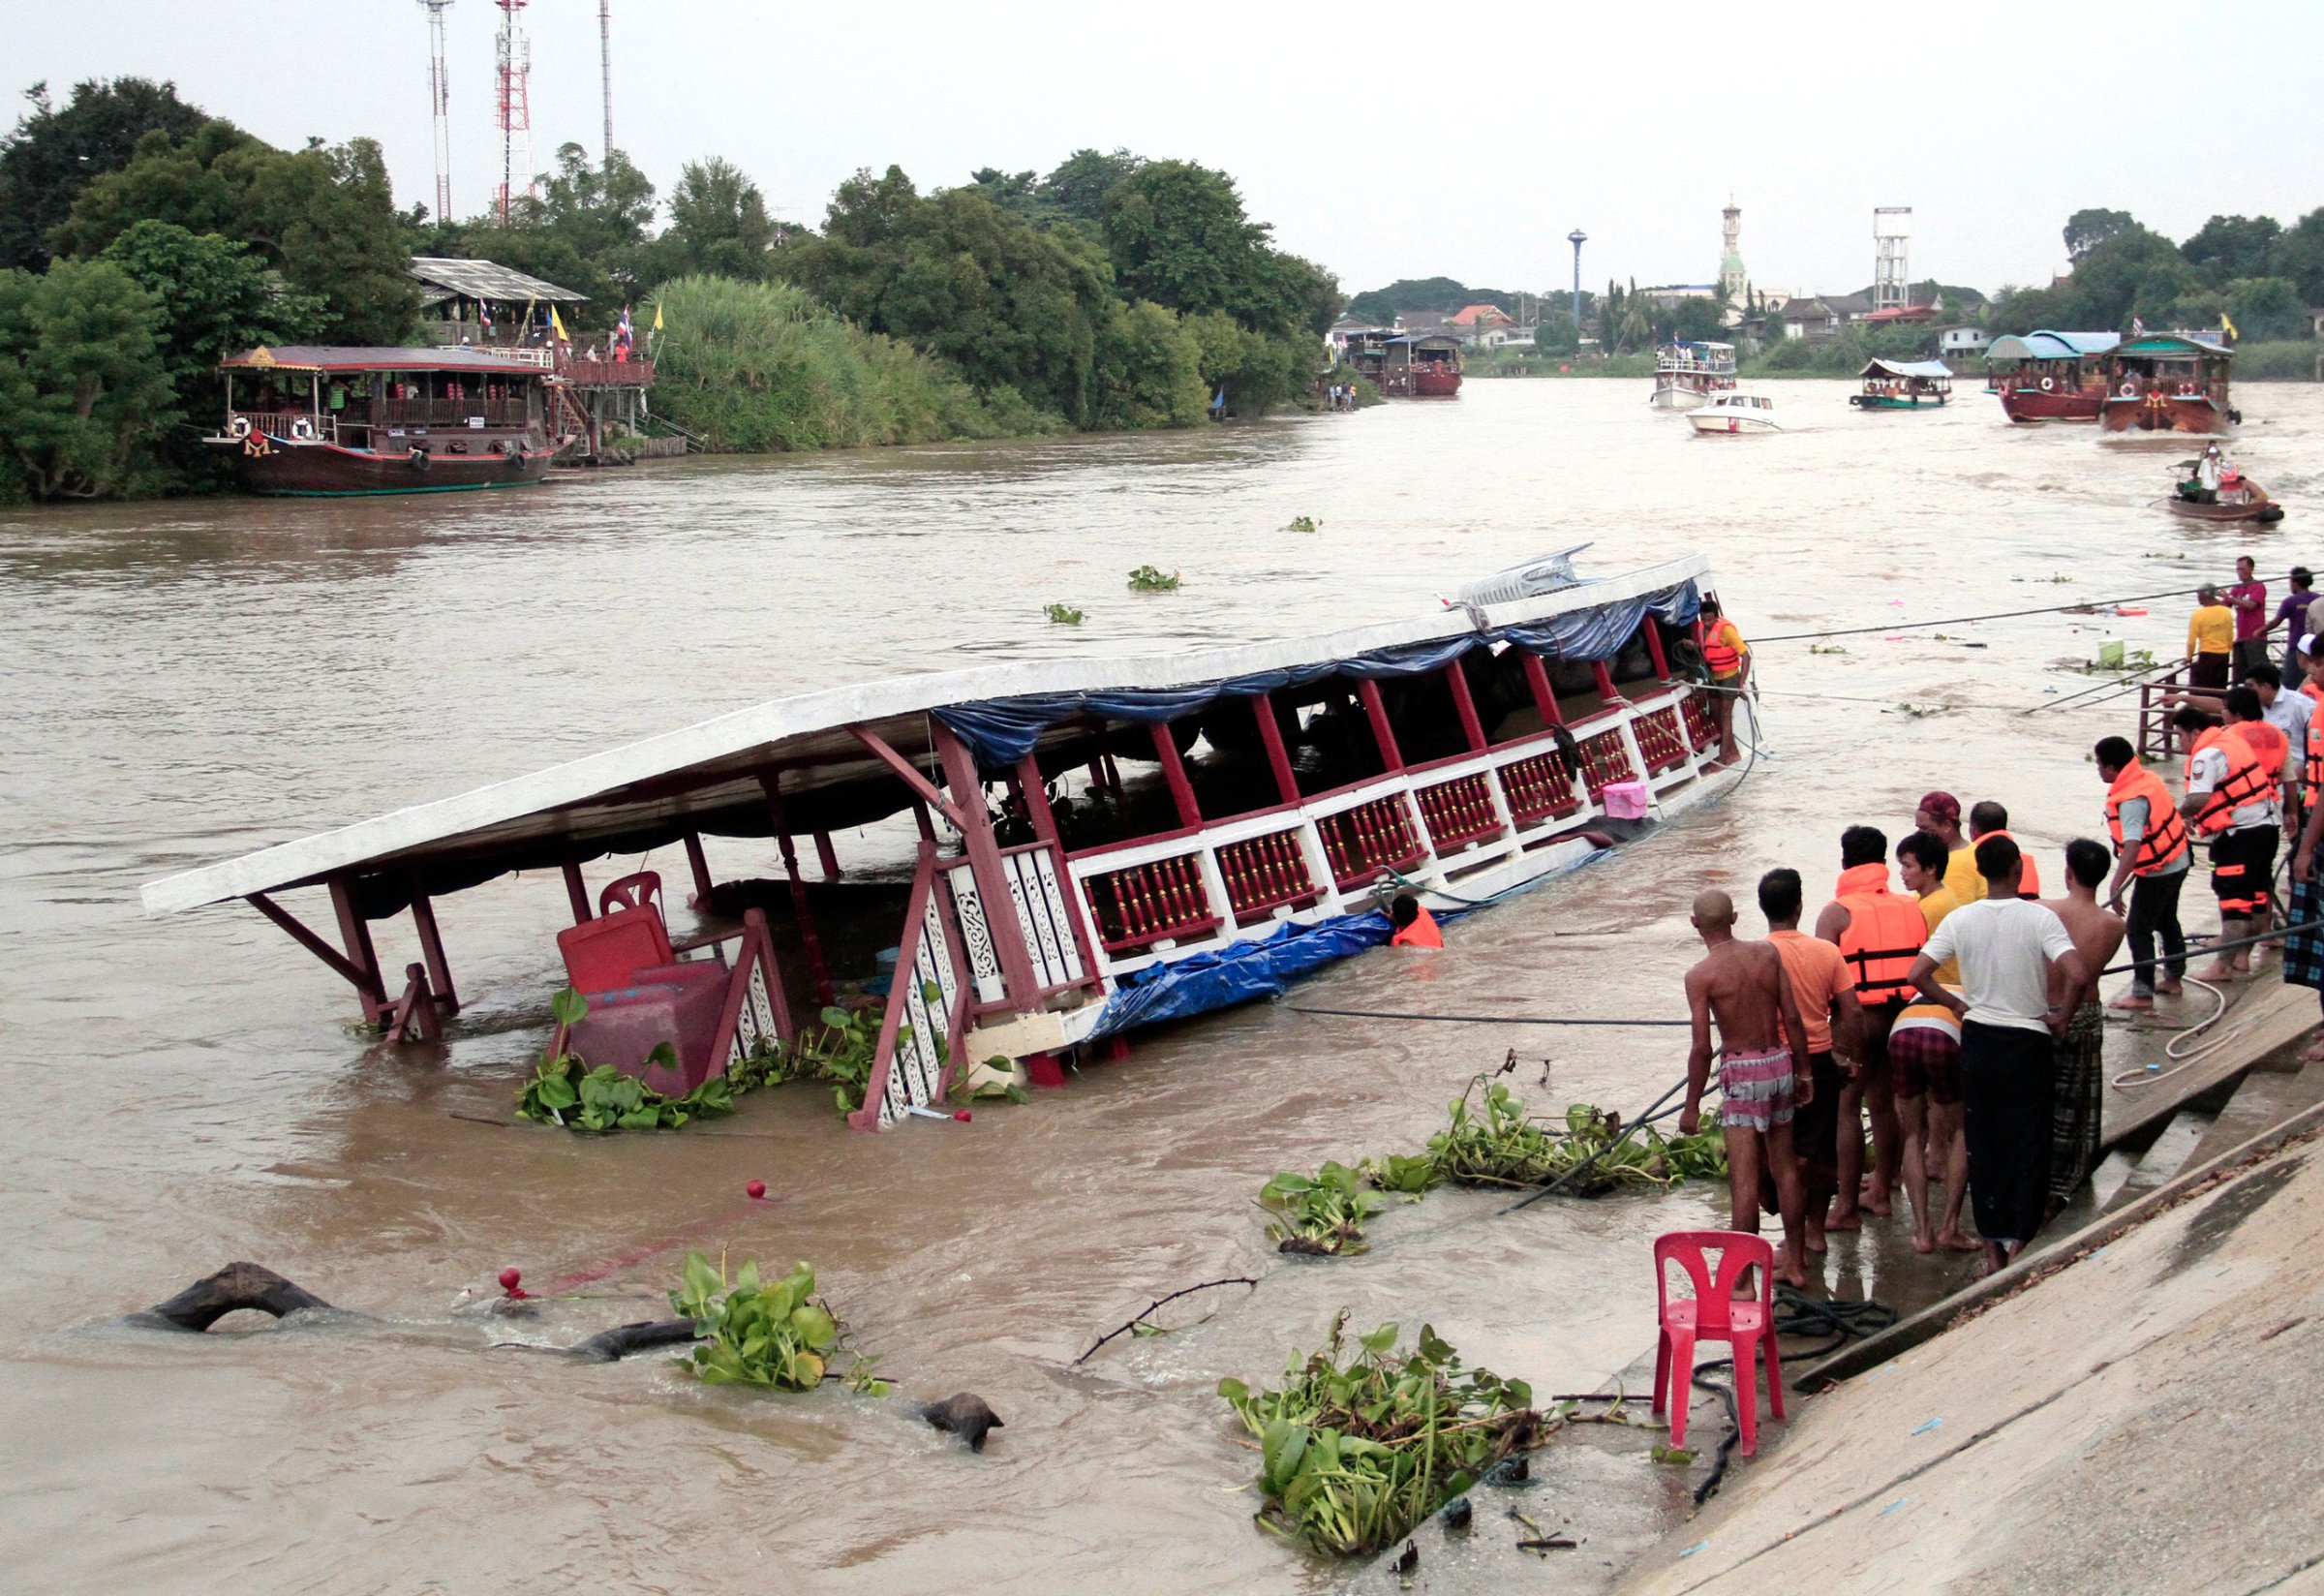 Thai rescue teams search for victims after a boat capsized at Chao Phraya River in Ayuthaya Province, Thailand, Sunday, Sept. 18, 2016. Thai news reports say at least 13 people were killed when a double-decker passenger boat carrying more than 100 people capsized in the Chao Phraya River north of Bangkok. Some people were still missing after the accident, which occurred when the boat was involved in a collision Sunday afternoon, but it was not immediately clear how many. (Dailynews via AP)